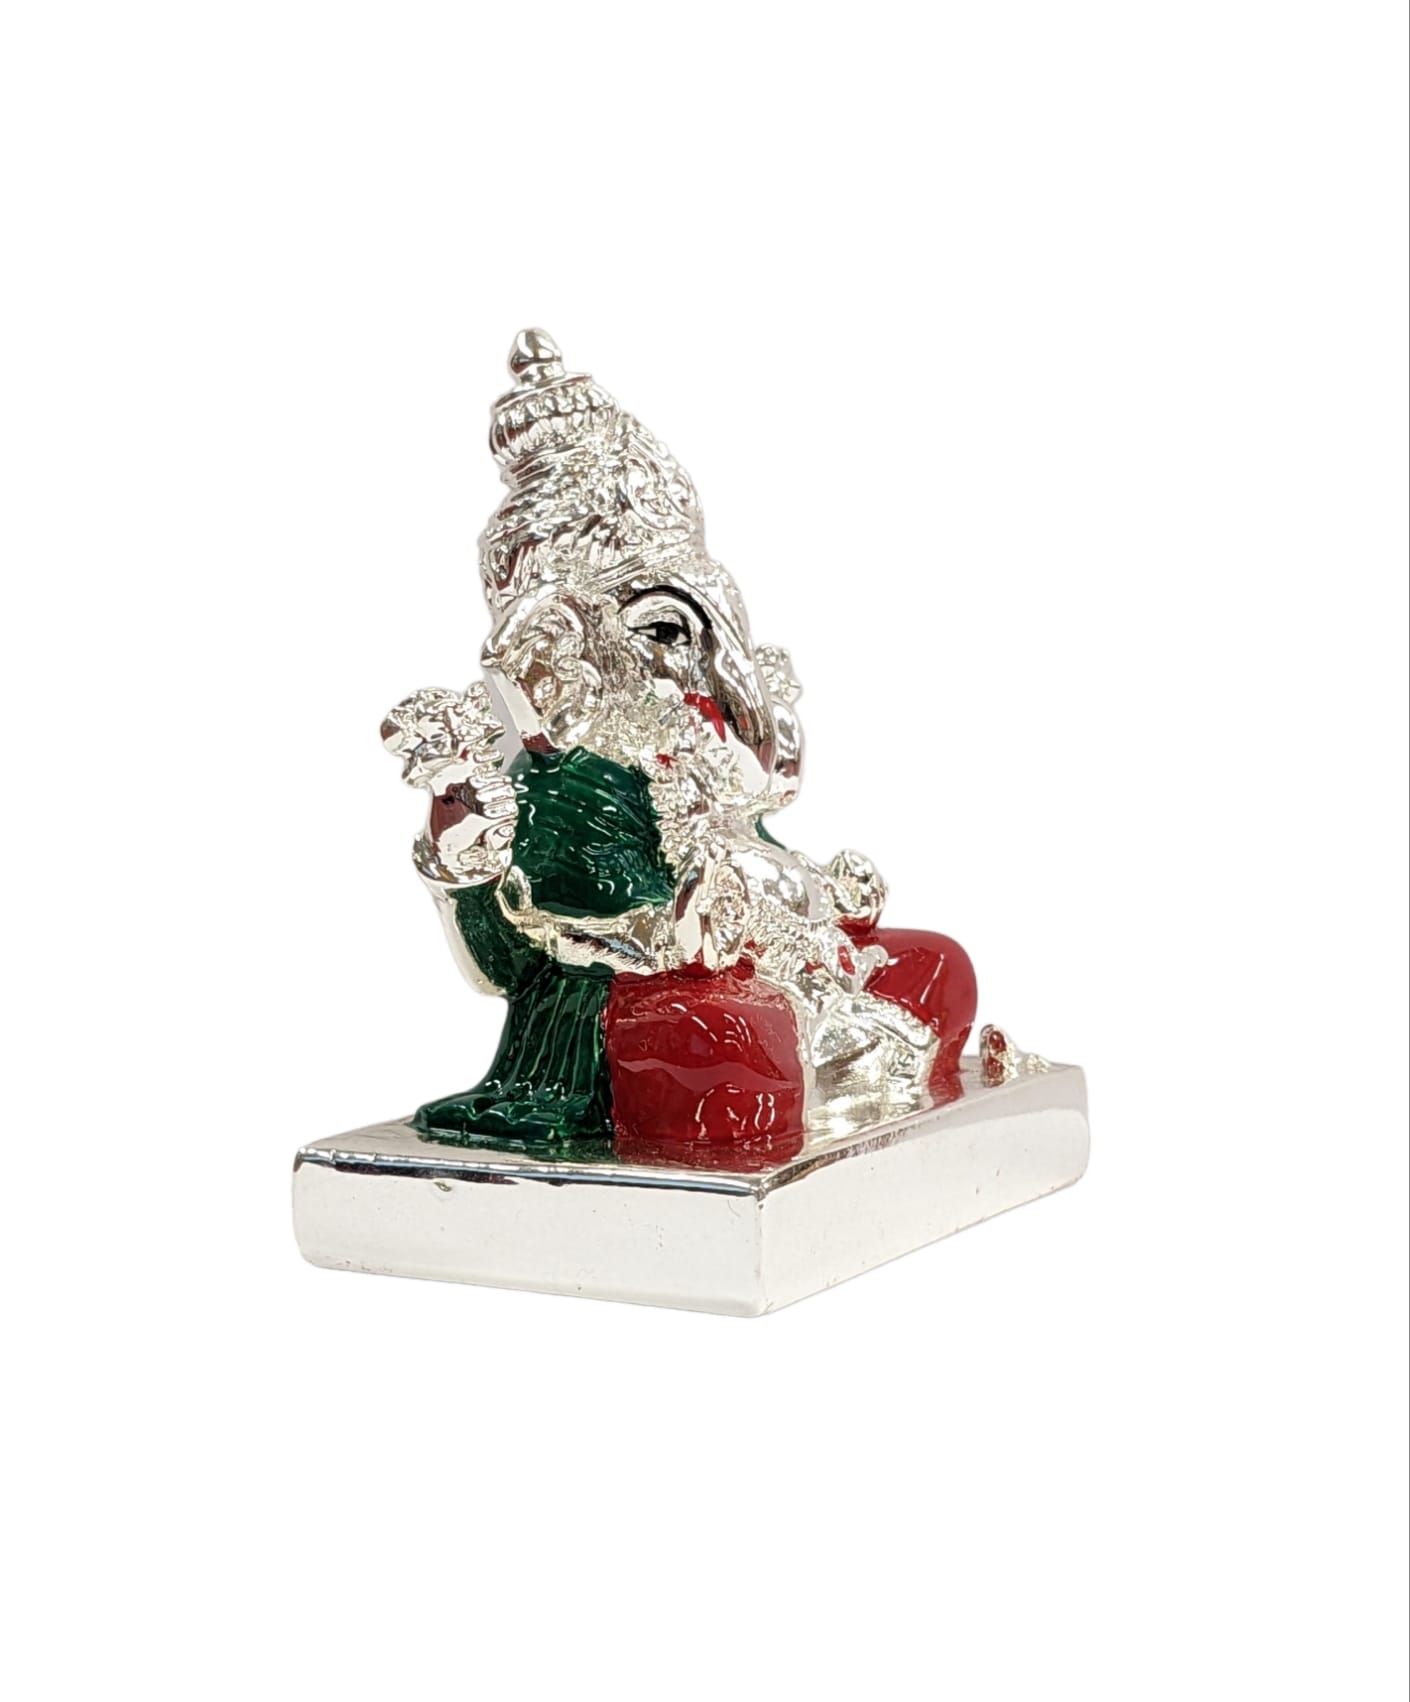 side view Image of a Pure Silver coated Ganesha Car Dashboard Idol for sale in Canada and US.